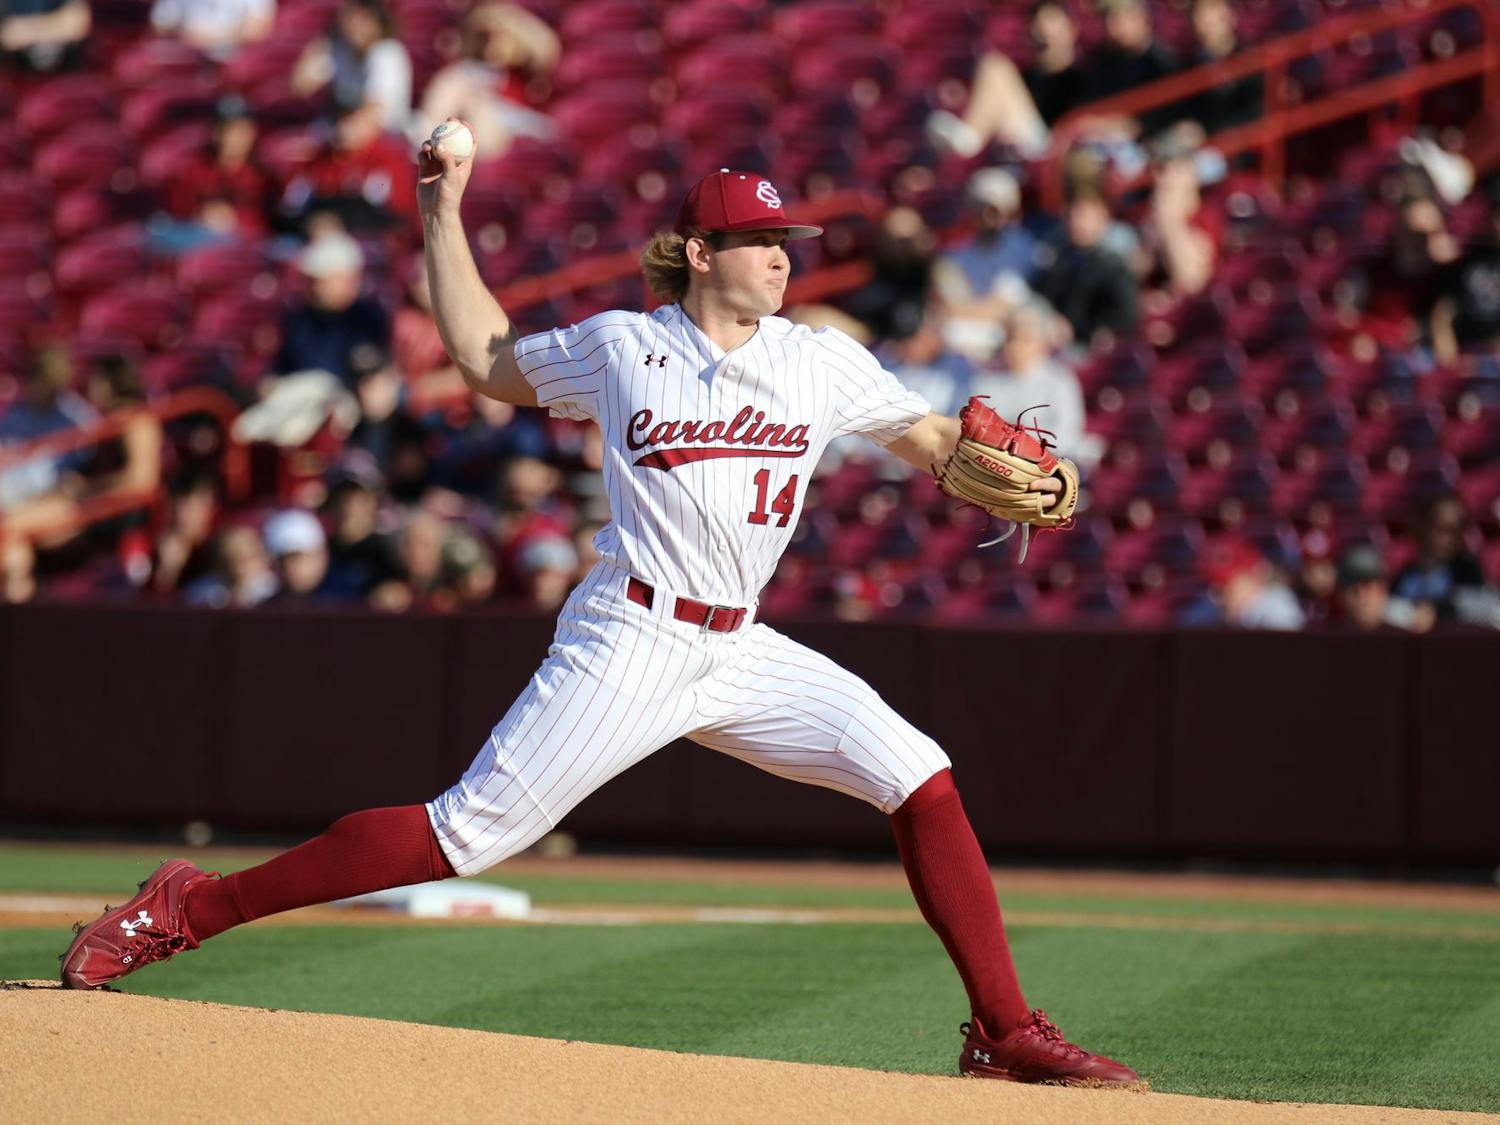 Junior pitcher Eli Jones throws from the mound during the first game of South Carolina's series against Belmont on Feb. 23, 2024, at Founders Park. Jones had three strikeouts during the Gamecocks’ 8-1 win against the Bruins.